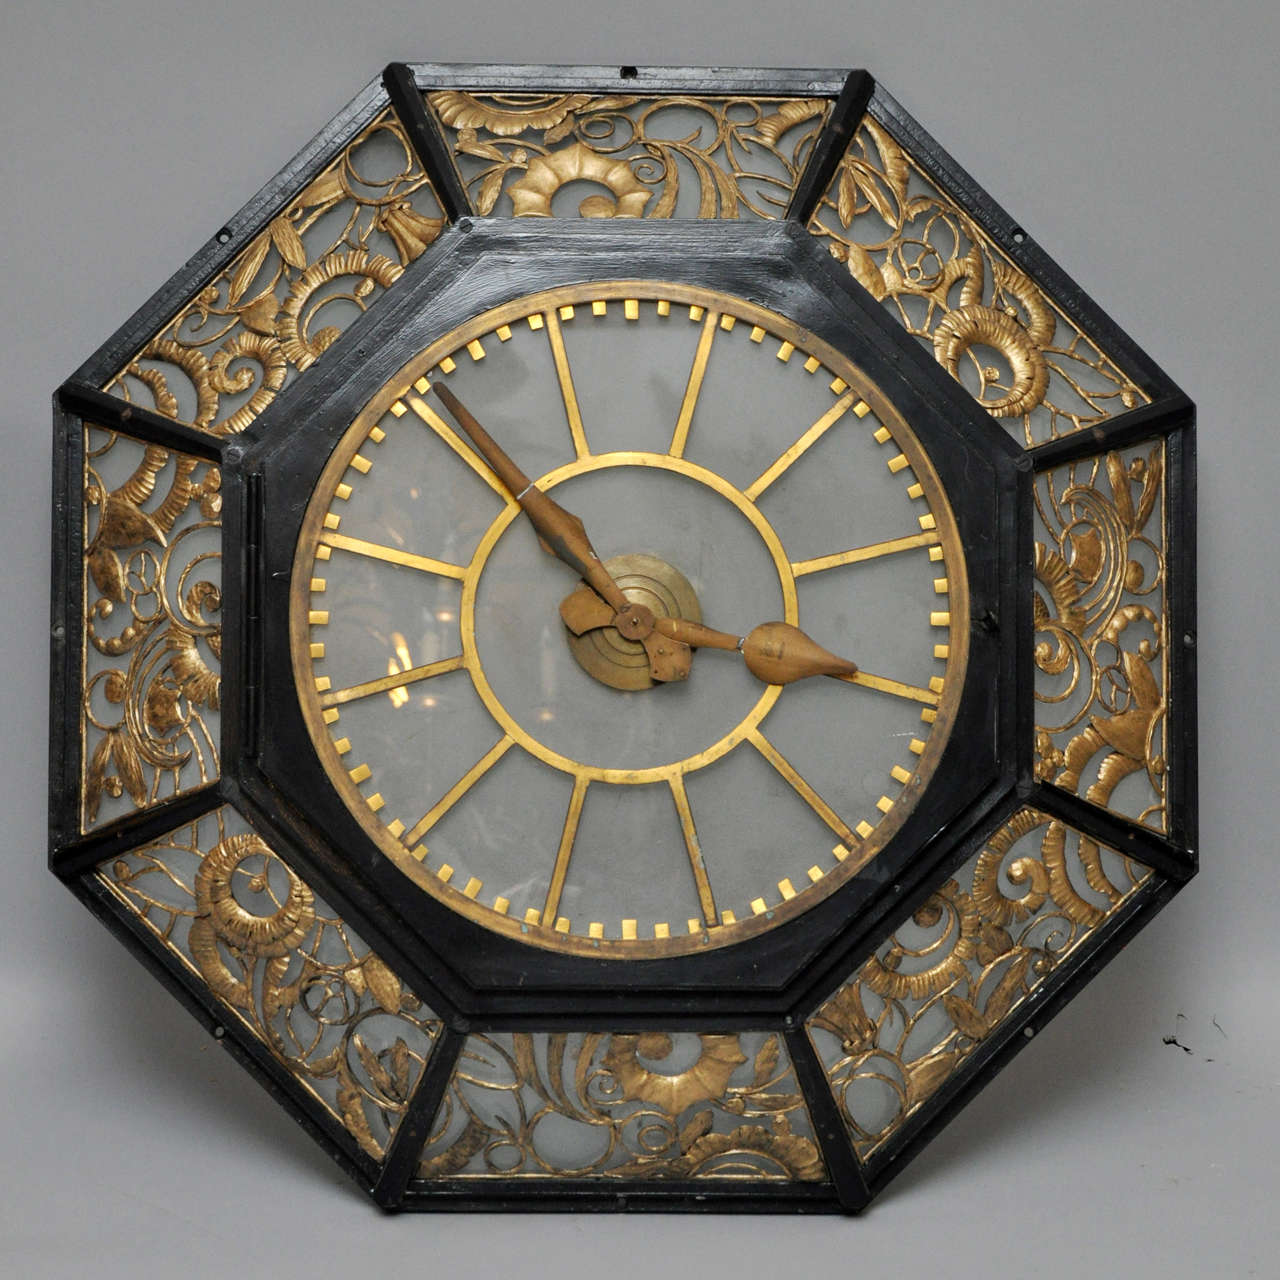 Rare French Art Deco hotel octagon wall clock. Frosted glass dial with bronze markers and painted metal hands, hinged door opens to reveal electric movement. Surrounding octagon shaped outer frame with gilded hand-forged filigree design.